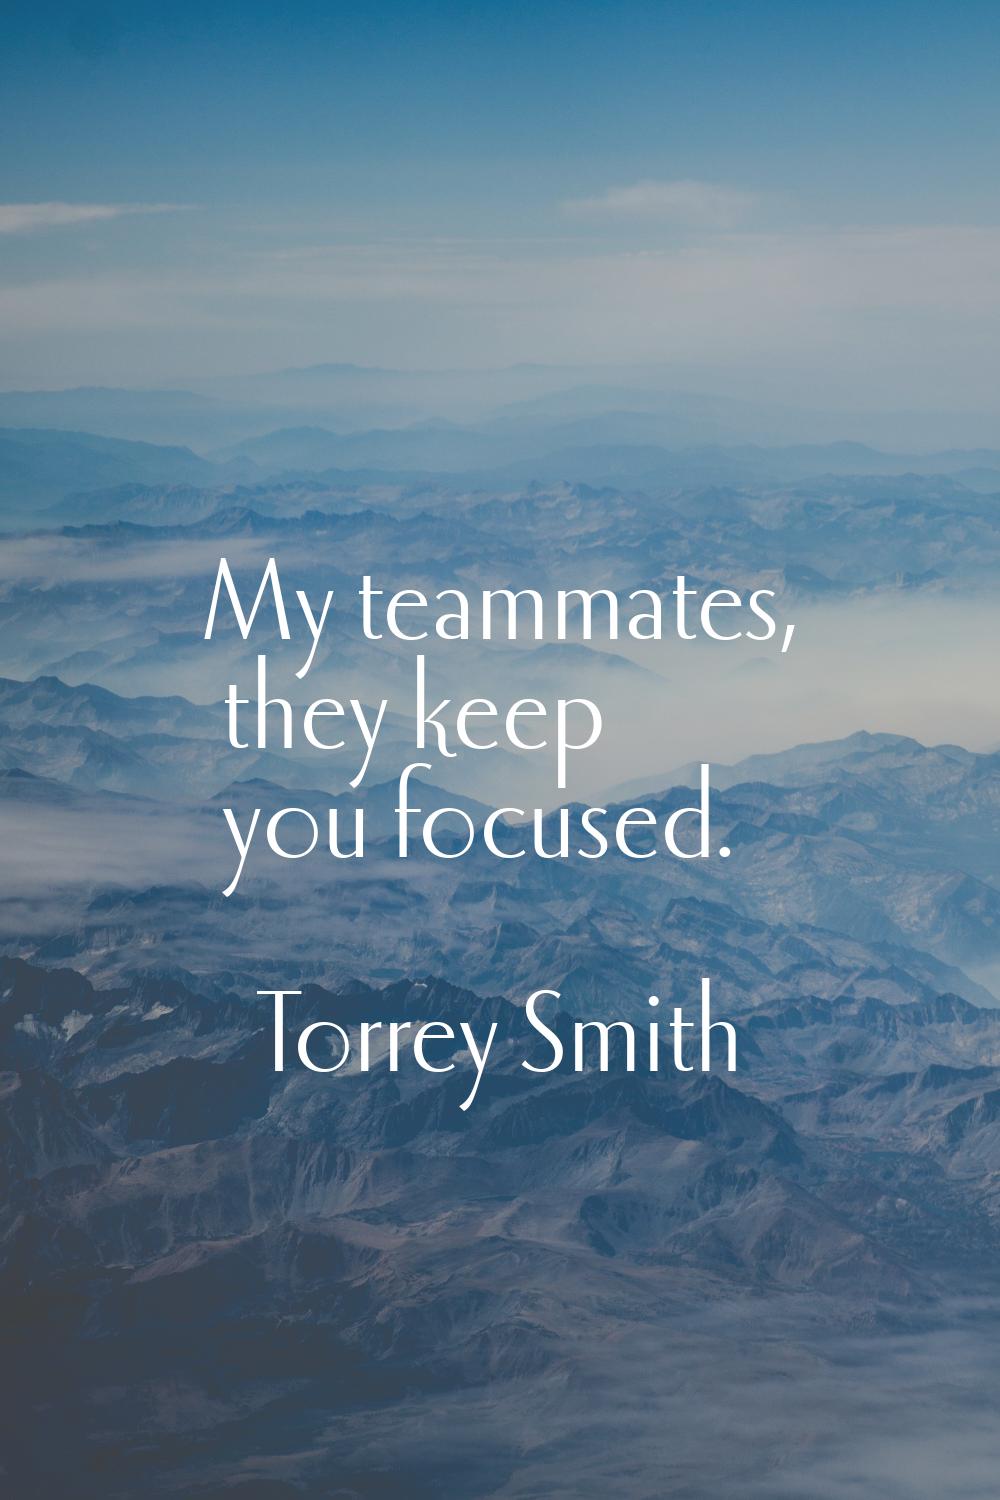 My teammates, they keep you focused.